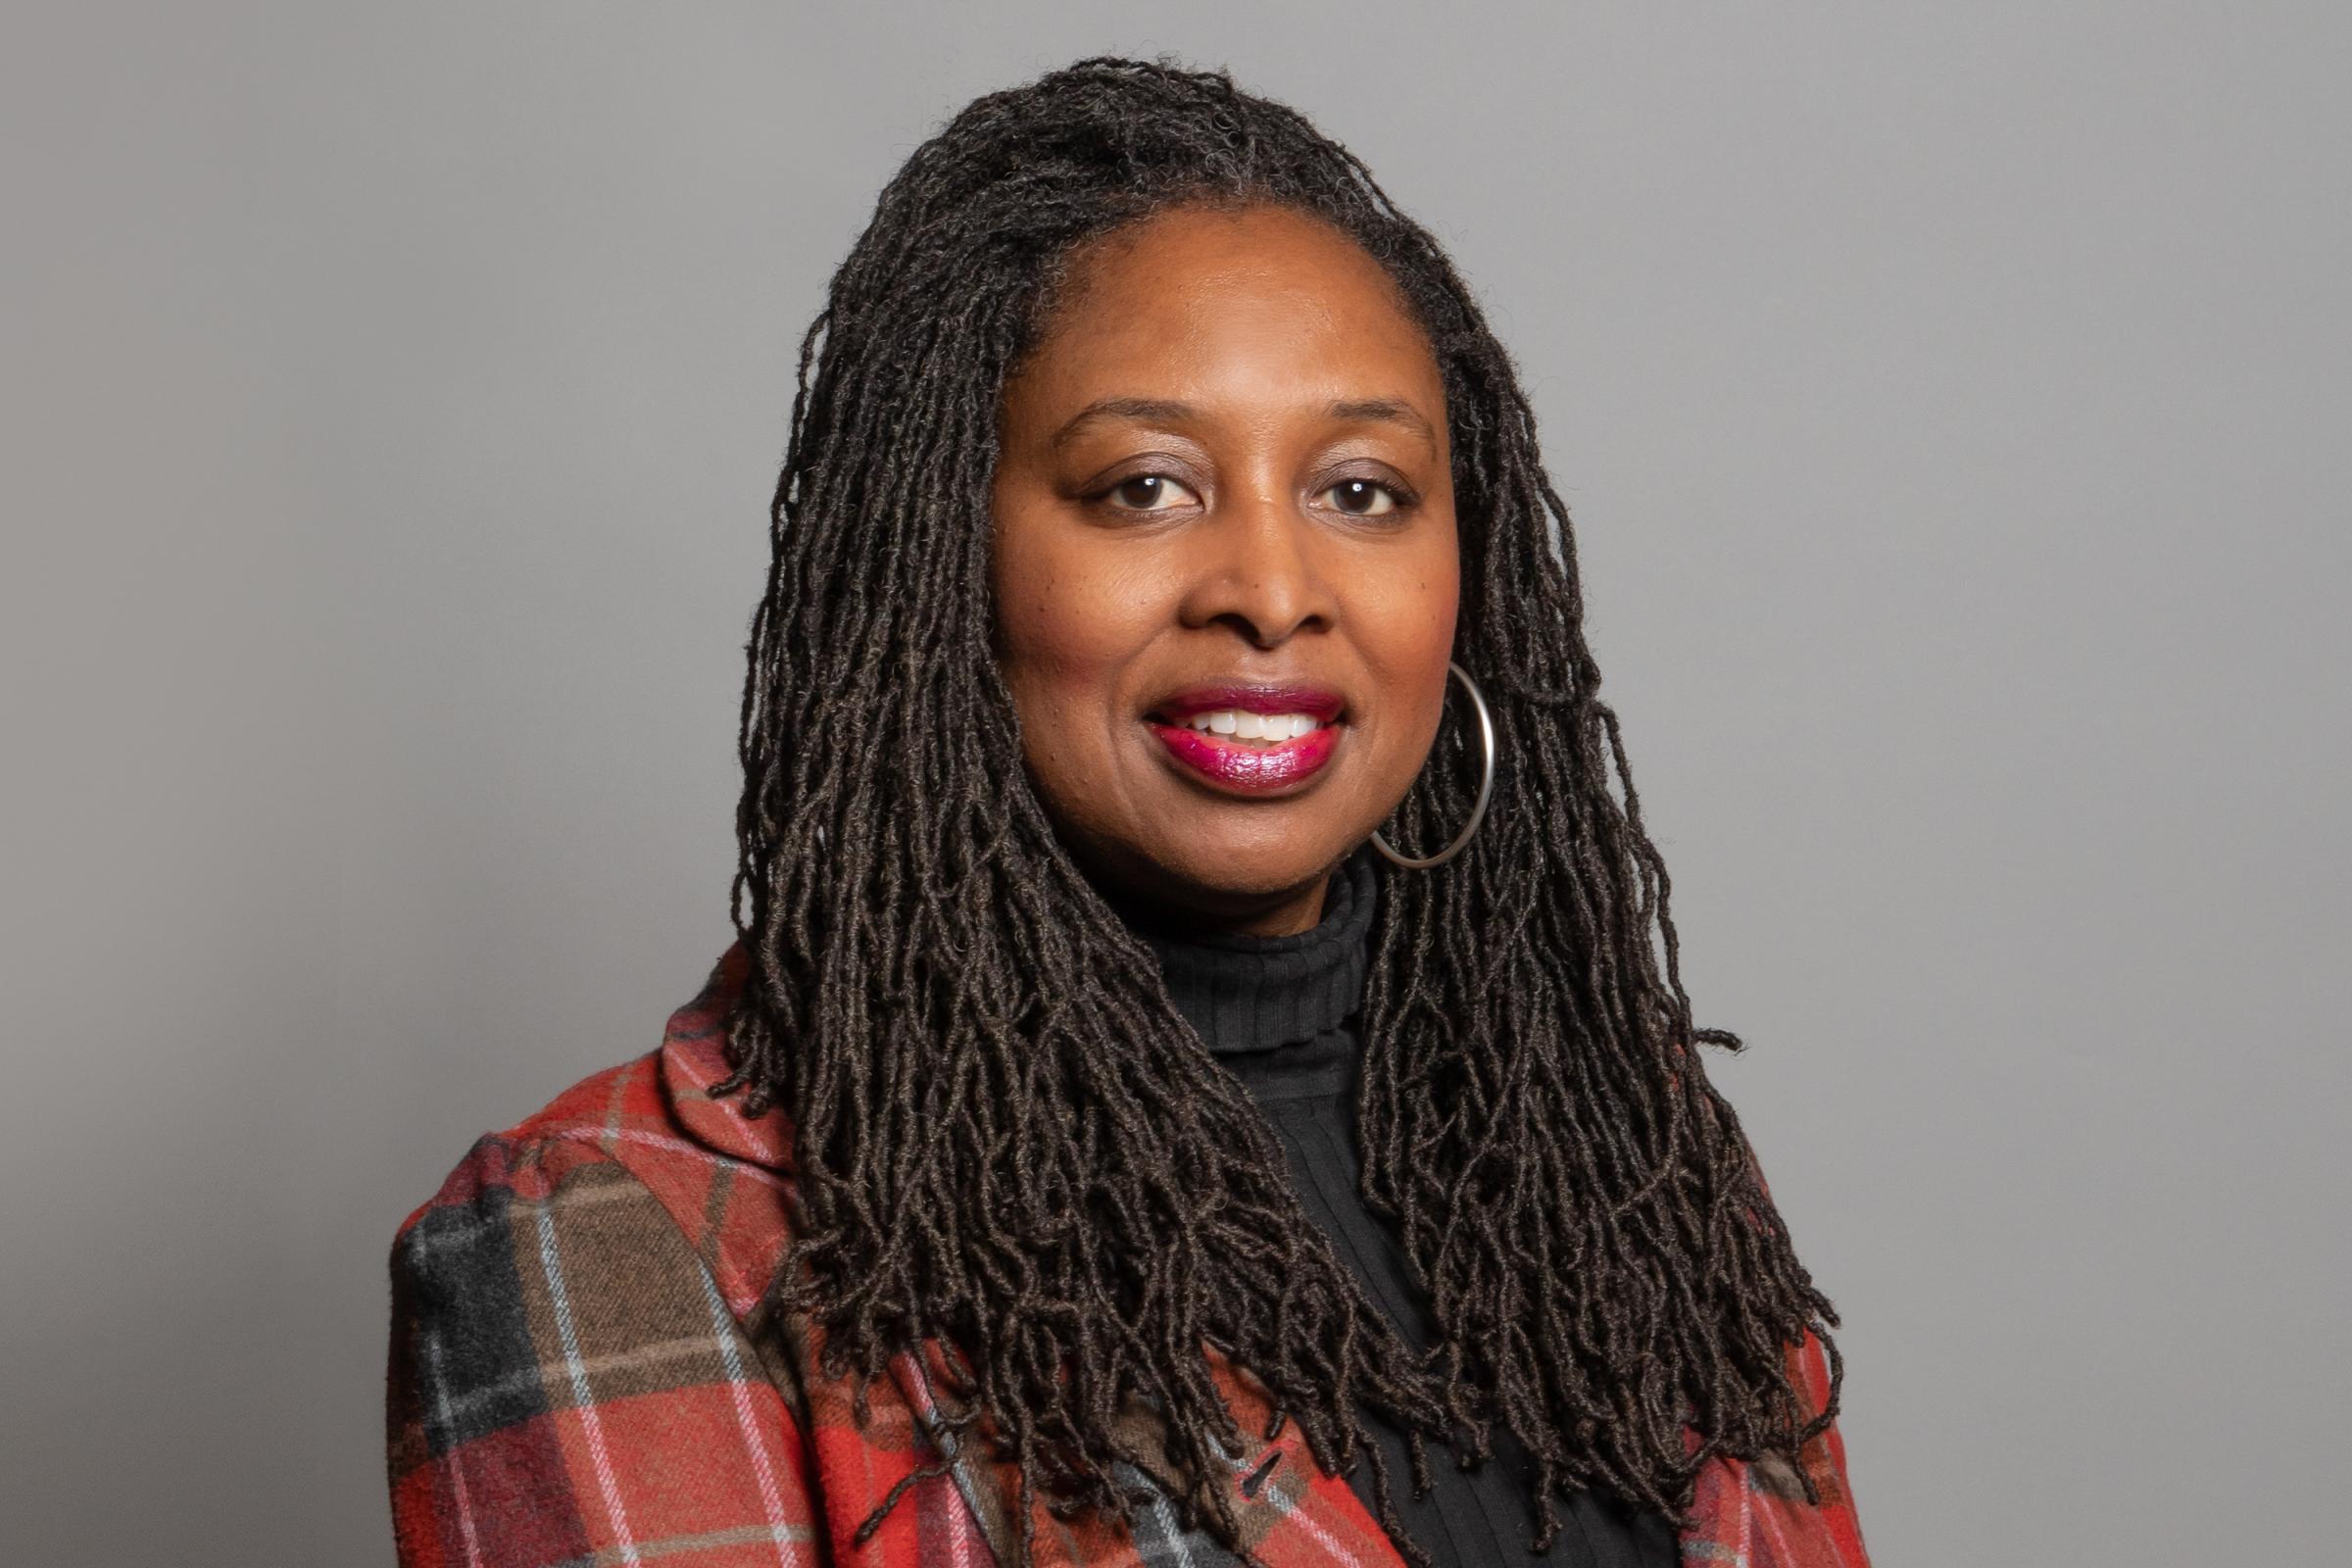 Dawn Butler MP. Credit: Richard Townshend/House of Commons